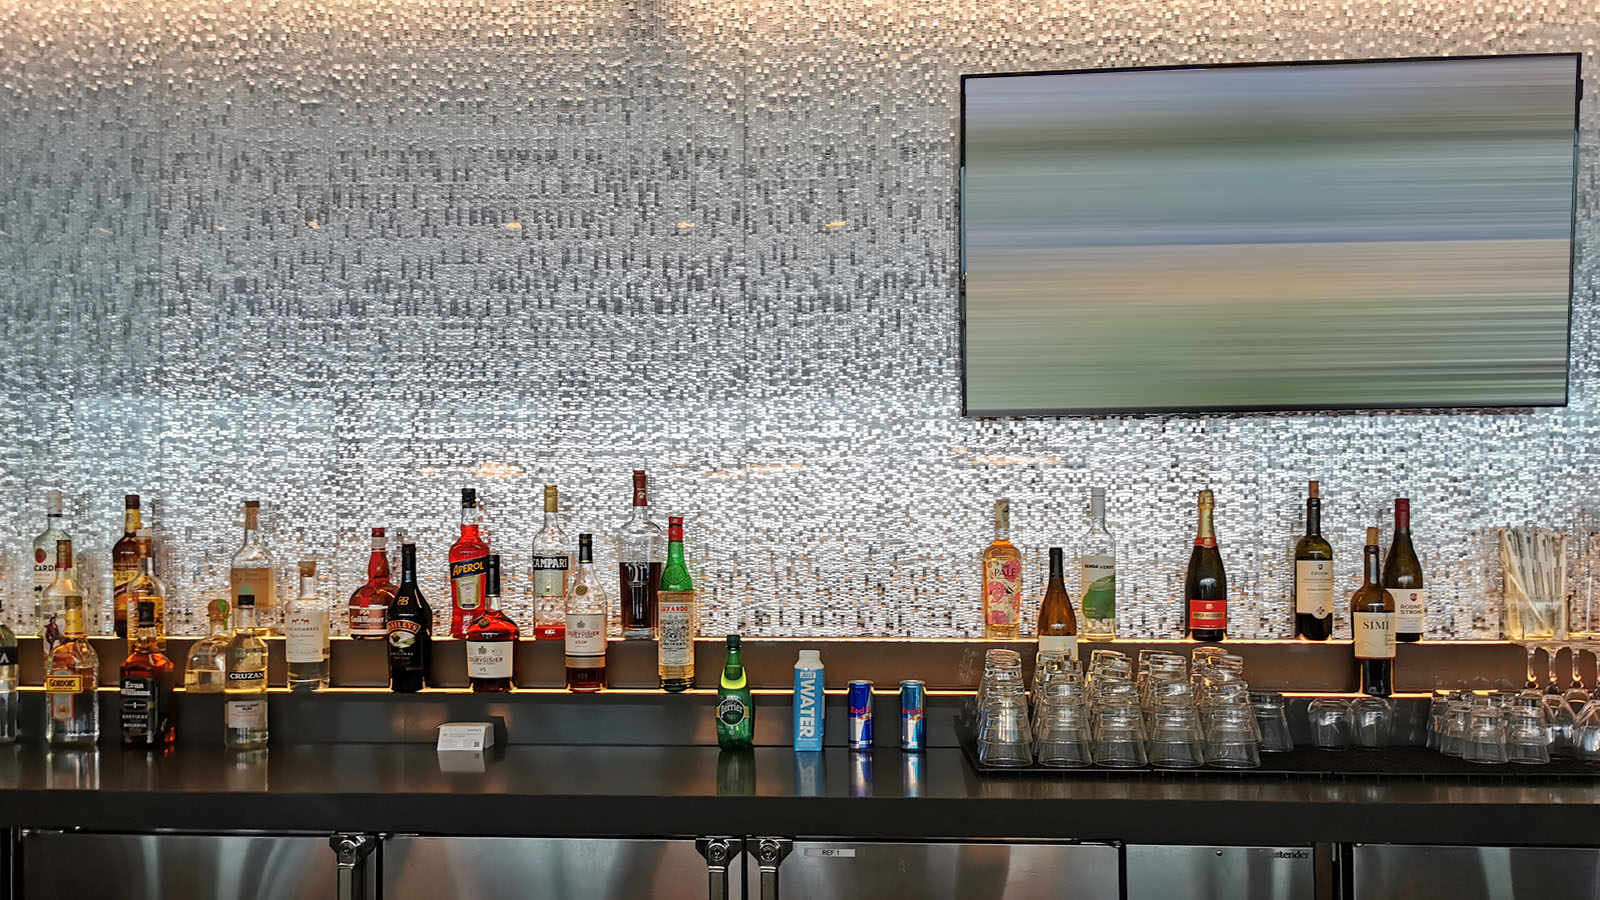 Bottles in the American Airlines Admirals Club, Los Angeles